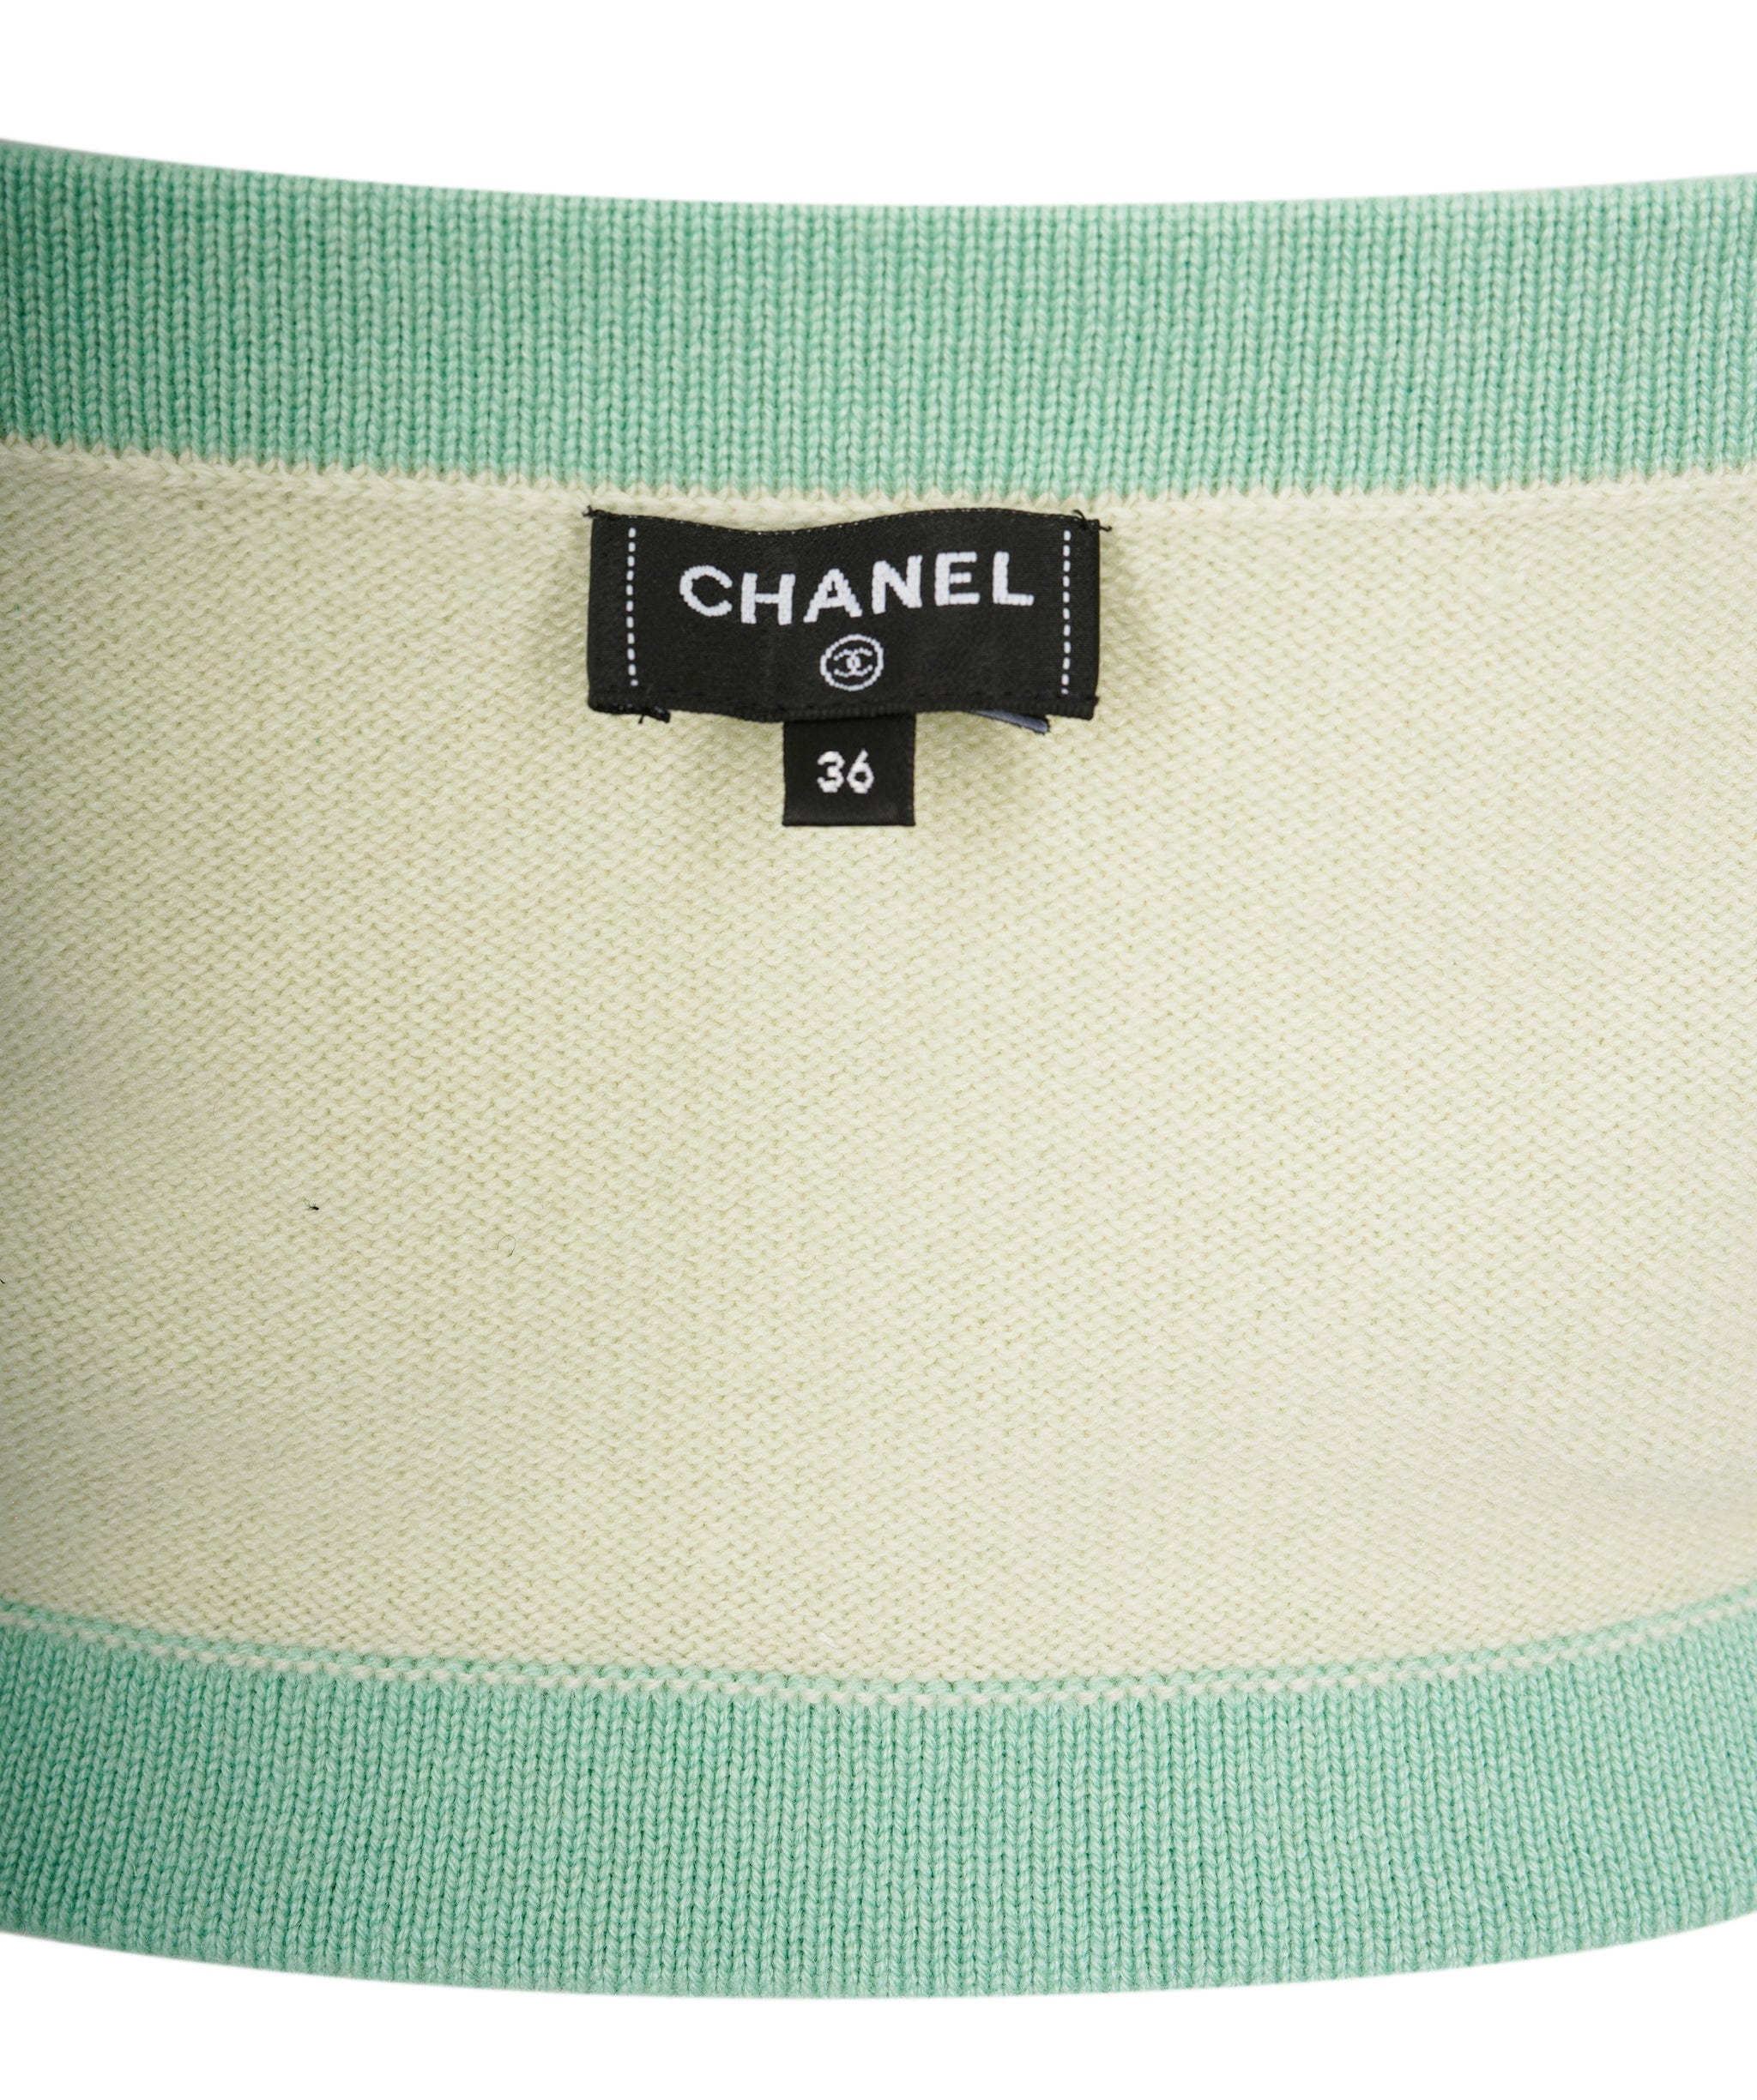 Chanel chanel knit top mint green + 2 sleeve gloves FR36 ASL8439